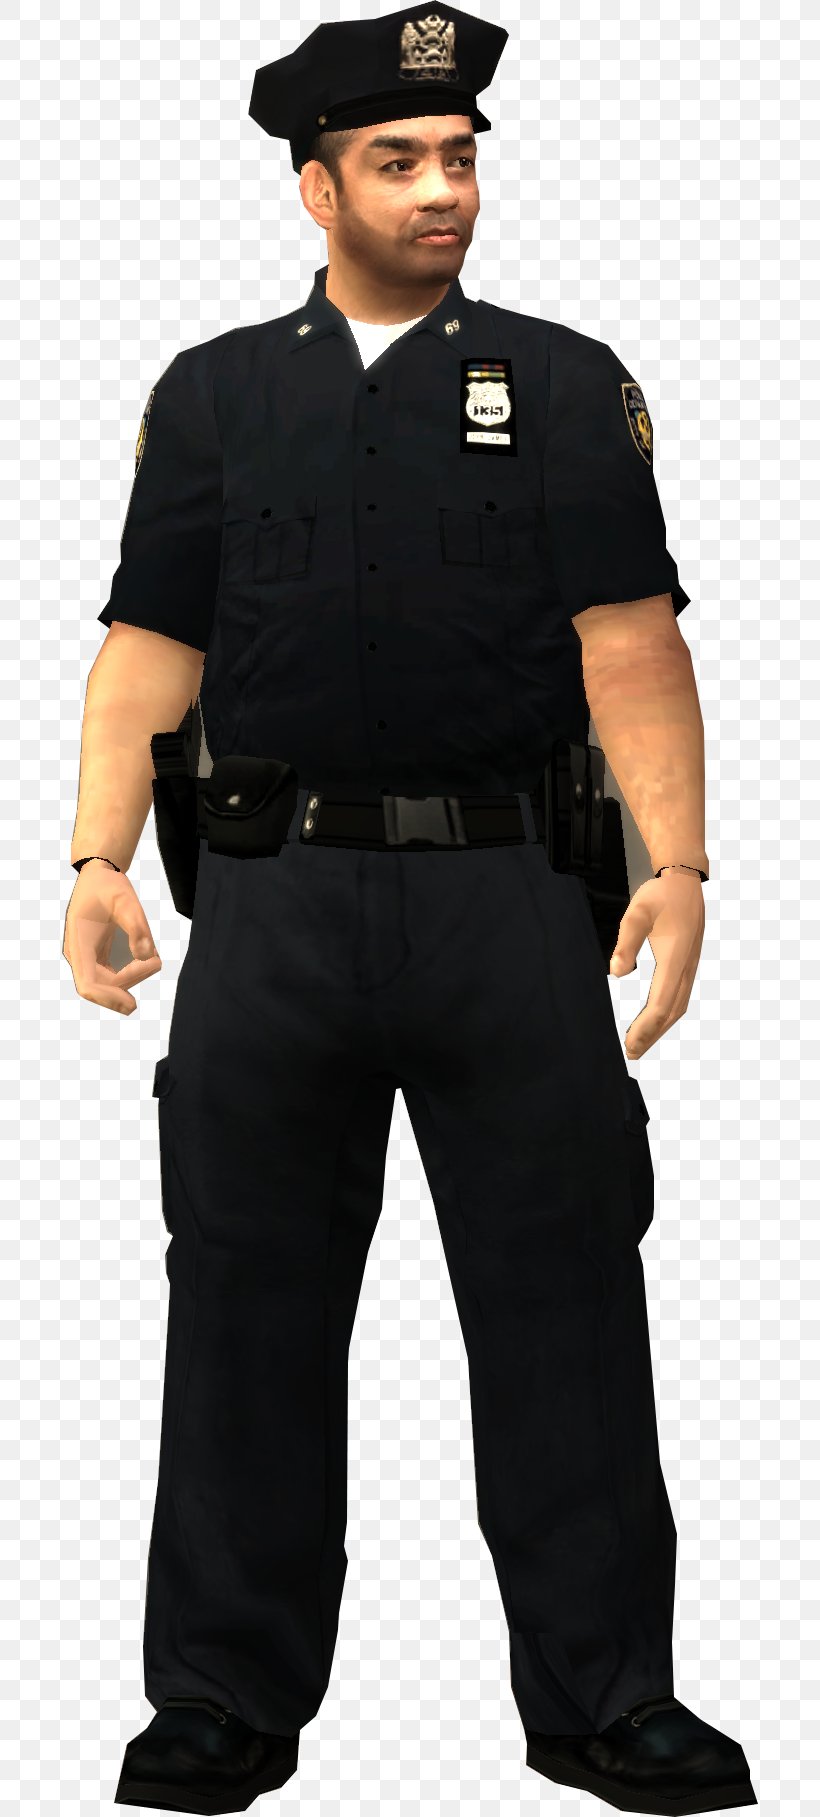 Grand Theft Auto V Grand Theft Auto IV Police Officer, PNG, 696x1817px, Grand Theft Auto V, Constable, Costume, Grand Theft Auto, Grand Theft Auto Iv Download Free